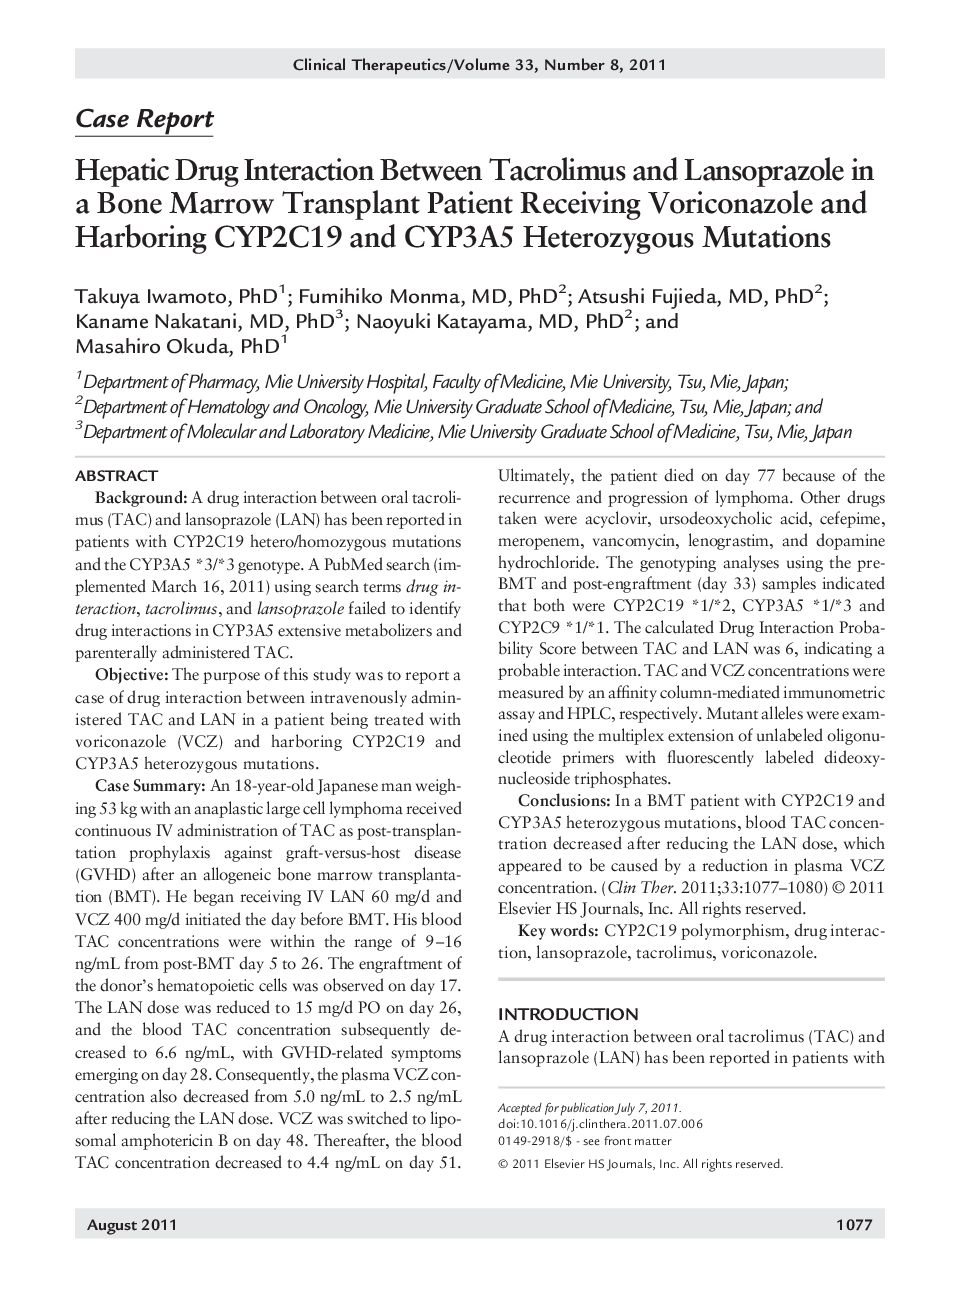 Hepatic Drug Interaction Between Tacrolimus and Lansoprazole in a Bone Marrow Transplant Patient Receiving Voriconazole and Harboring CYP2C19 and CYP3A5 Heterozygous Mutations